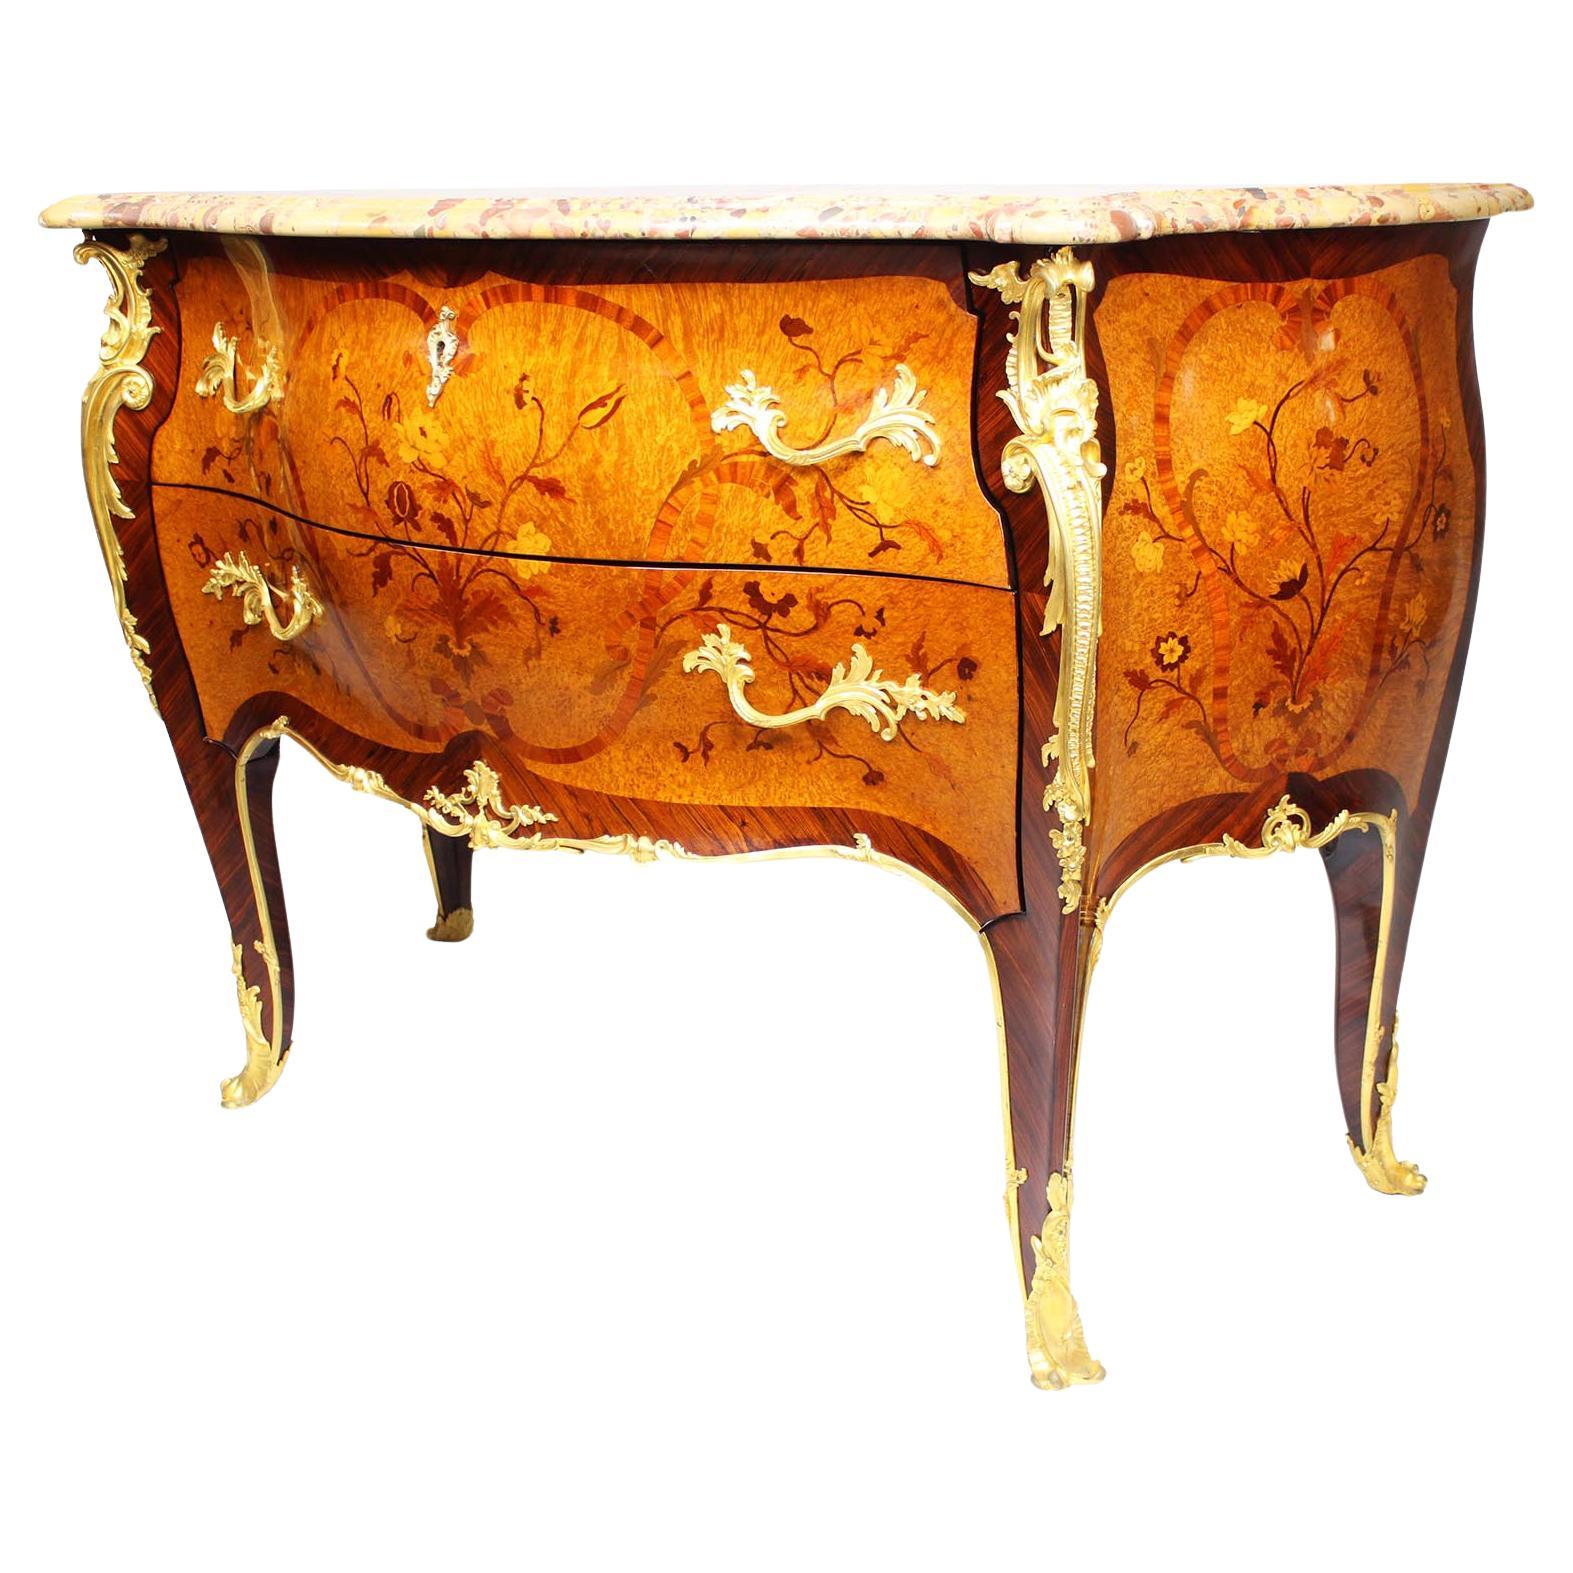 Fine French Louis XV Style Ormolu-Mounted Bombe Commode Attr. to François Linke For Sale